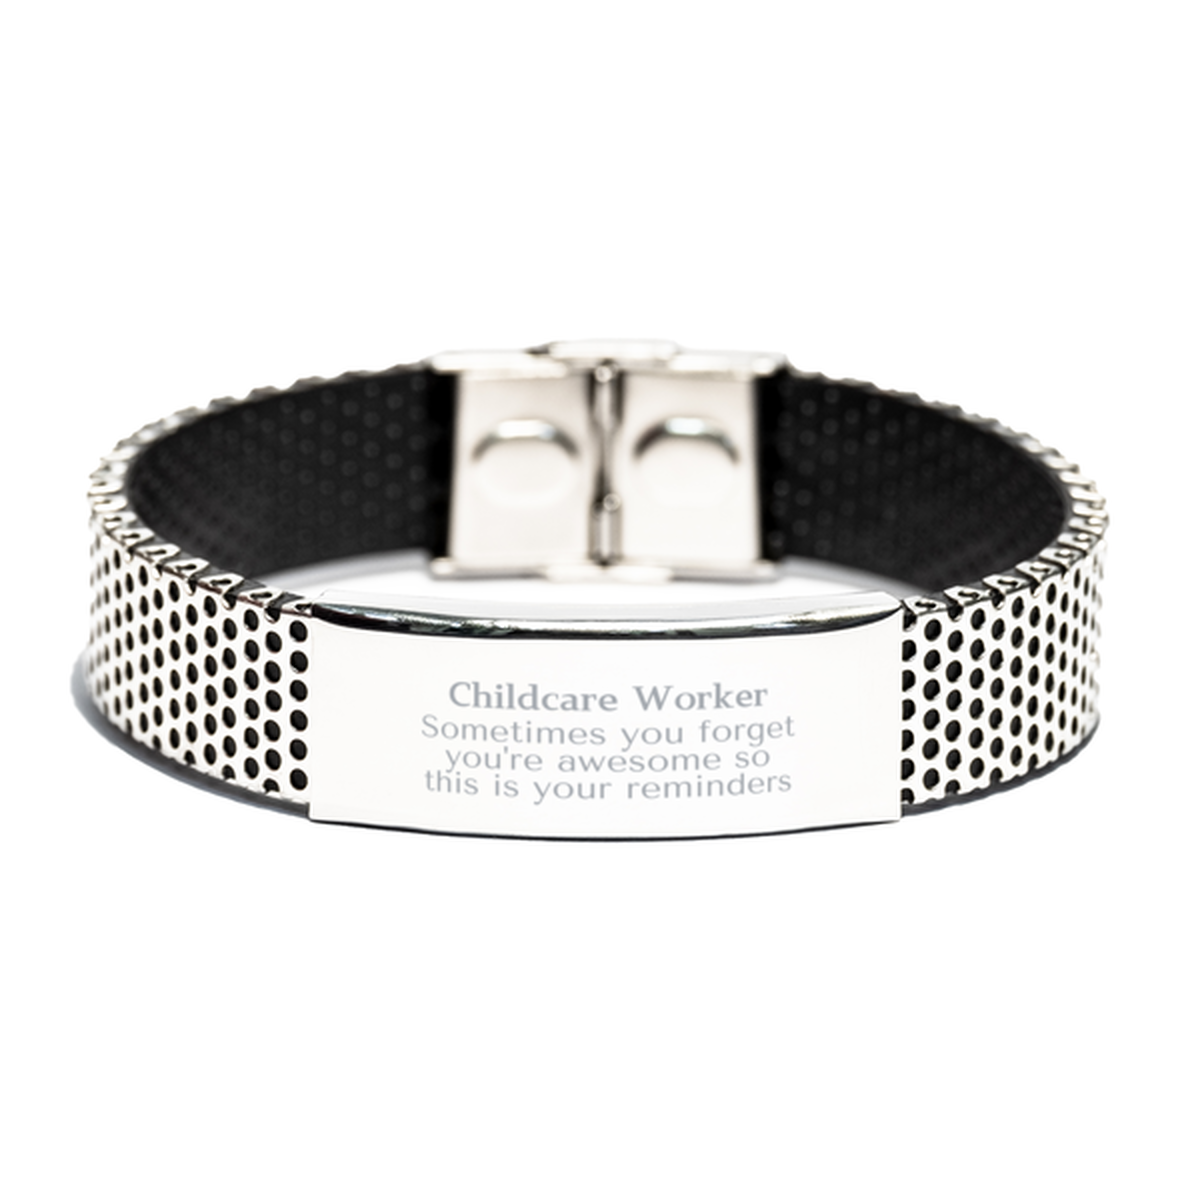 Sentimental Childcare Worker Stainless Steel Bracelet, Childcare Worker Sometimes you forget you're awesome so this is your reminders, Graduation Christmas Birthday Gifts for Childcare Worker, Men, Women, Coworkers